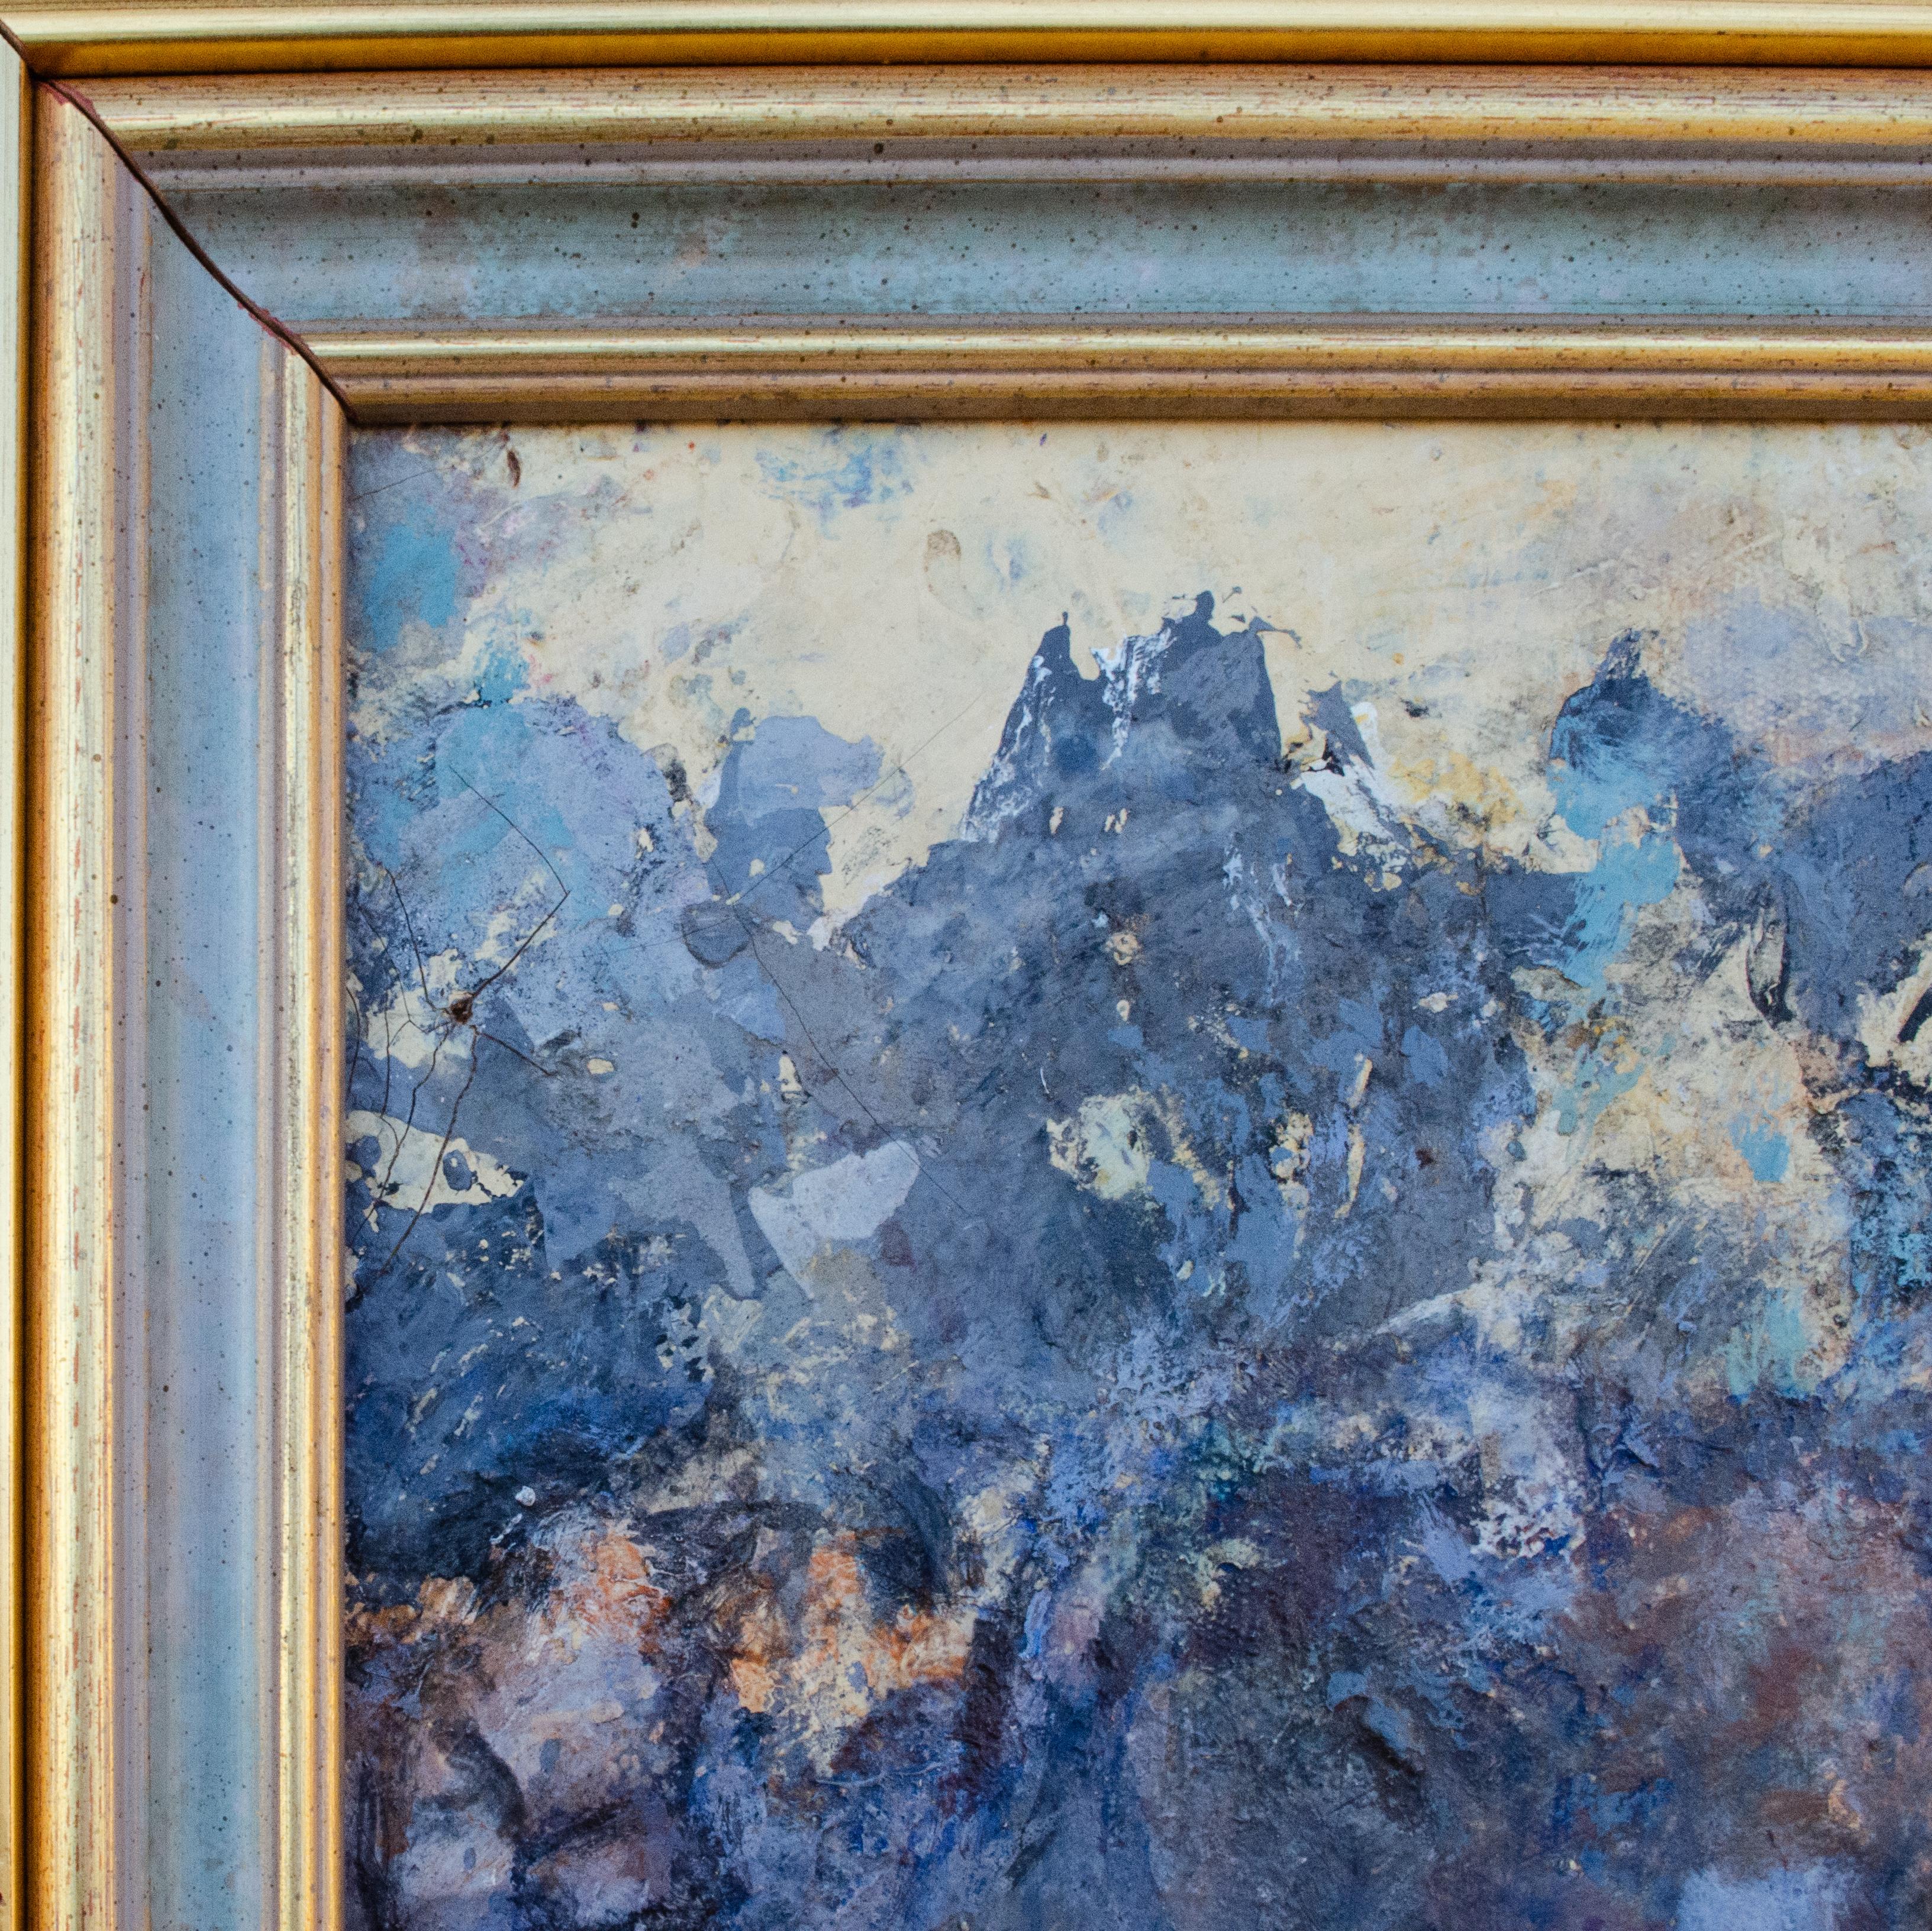 Mystery Artist
Untitled, c. 20th Century
Oil on canvas
27 1/2 x 22 in.
Framed: 33 3/4 x 28 1/4 x 1 1/4 in. 
Signed lower right
